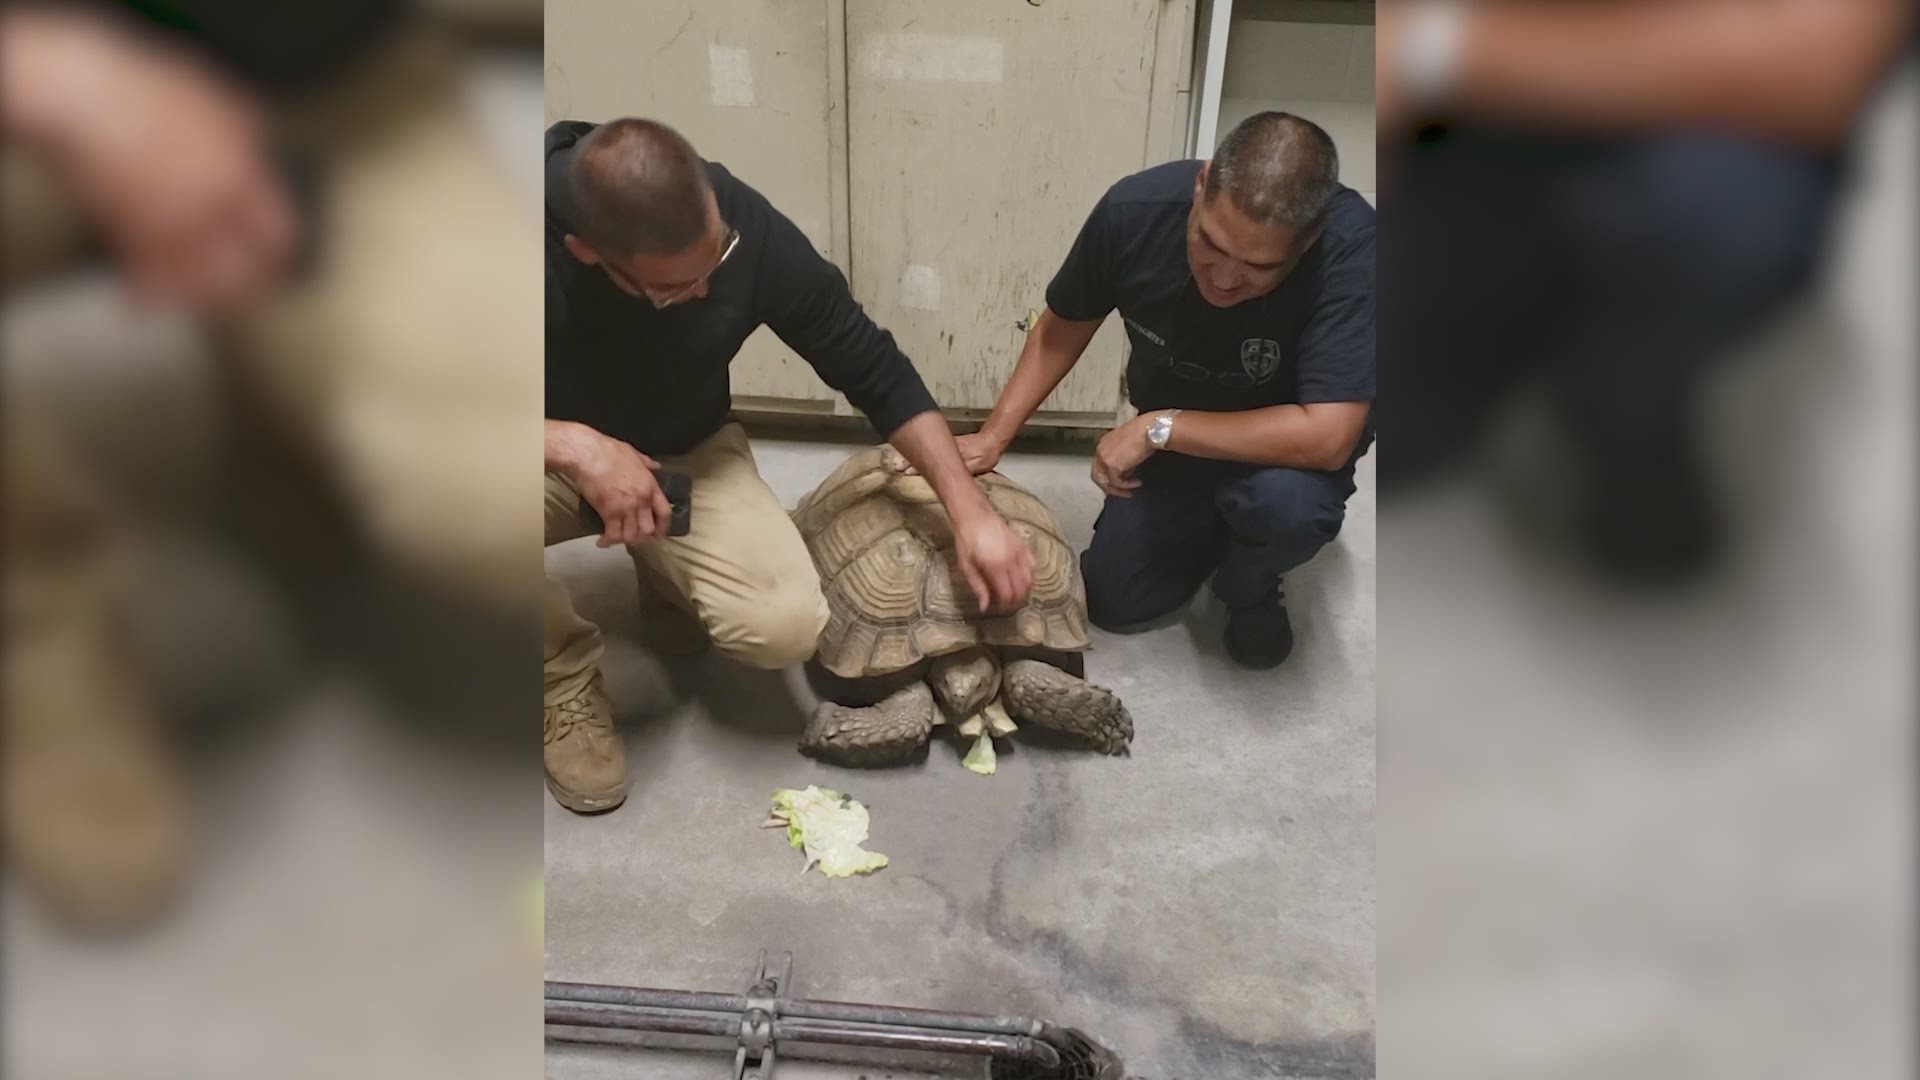 It's not everyday you see a tortoise at a fire station, but that's just what happened Monday at Houston Fire Station 45.